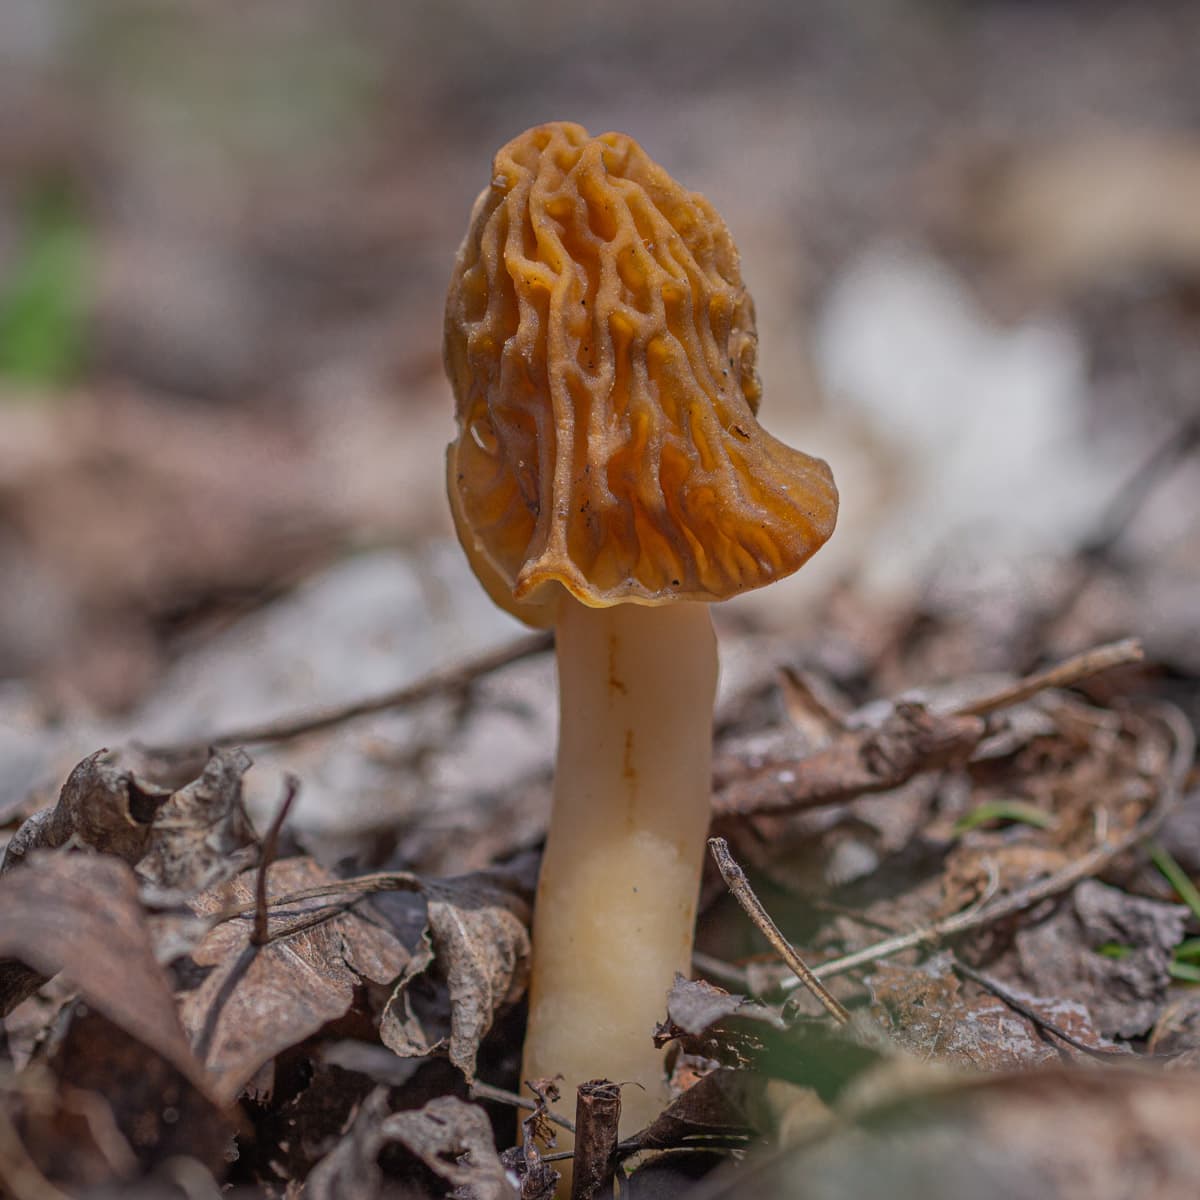 A young verpa bohemica mushroom growing in an aspen forest. 